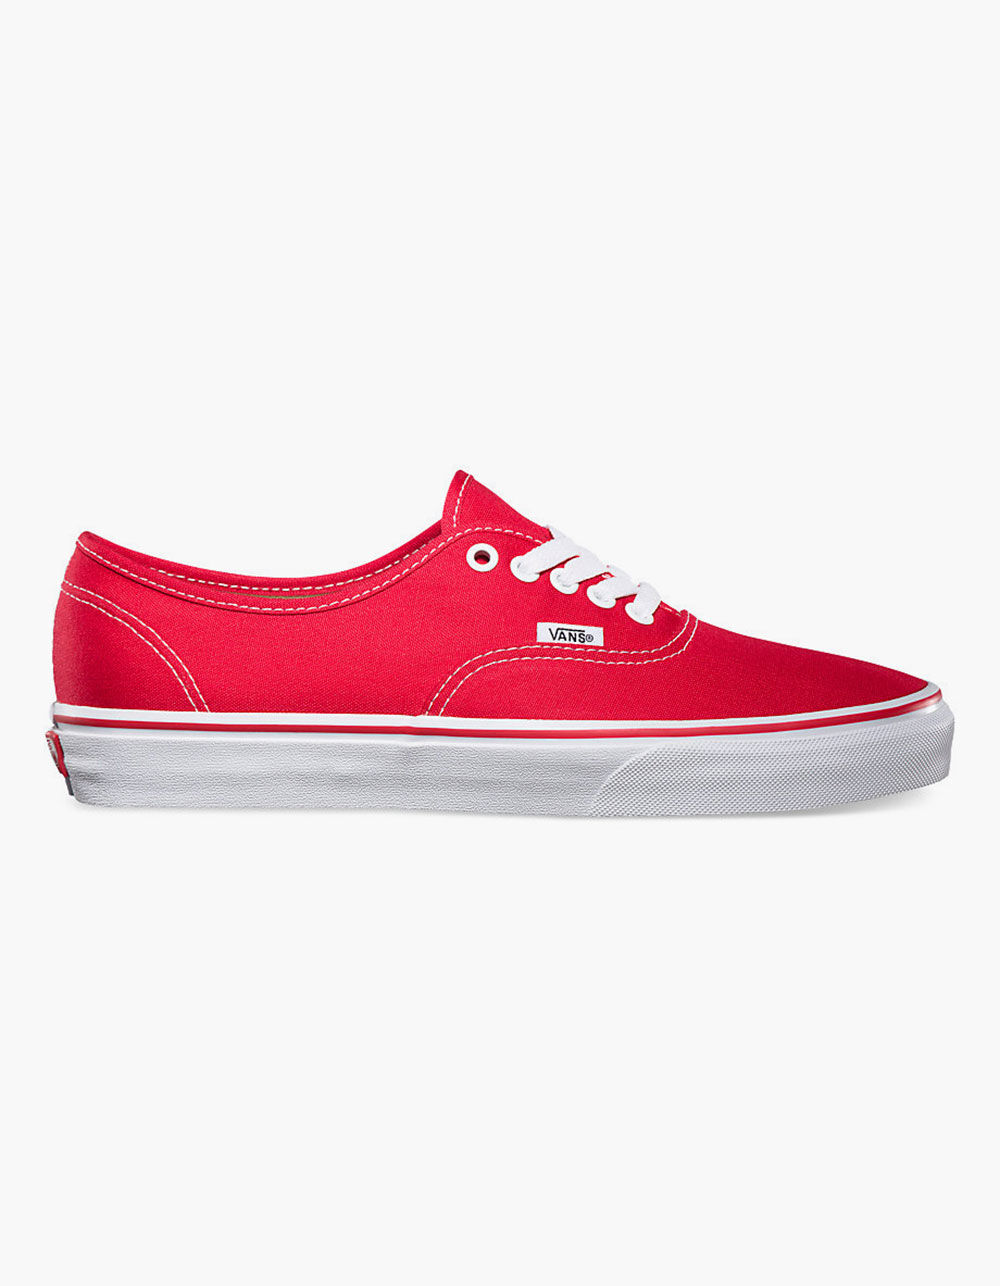 VANS Authentic Red Shoes image number 0